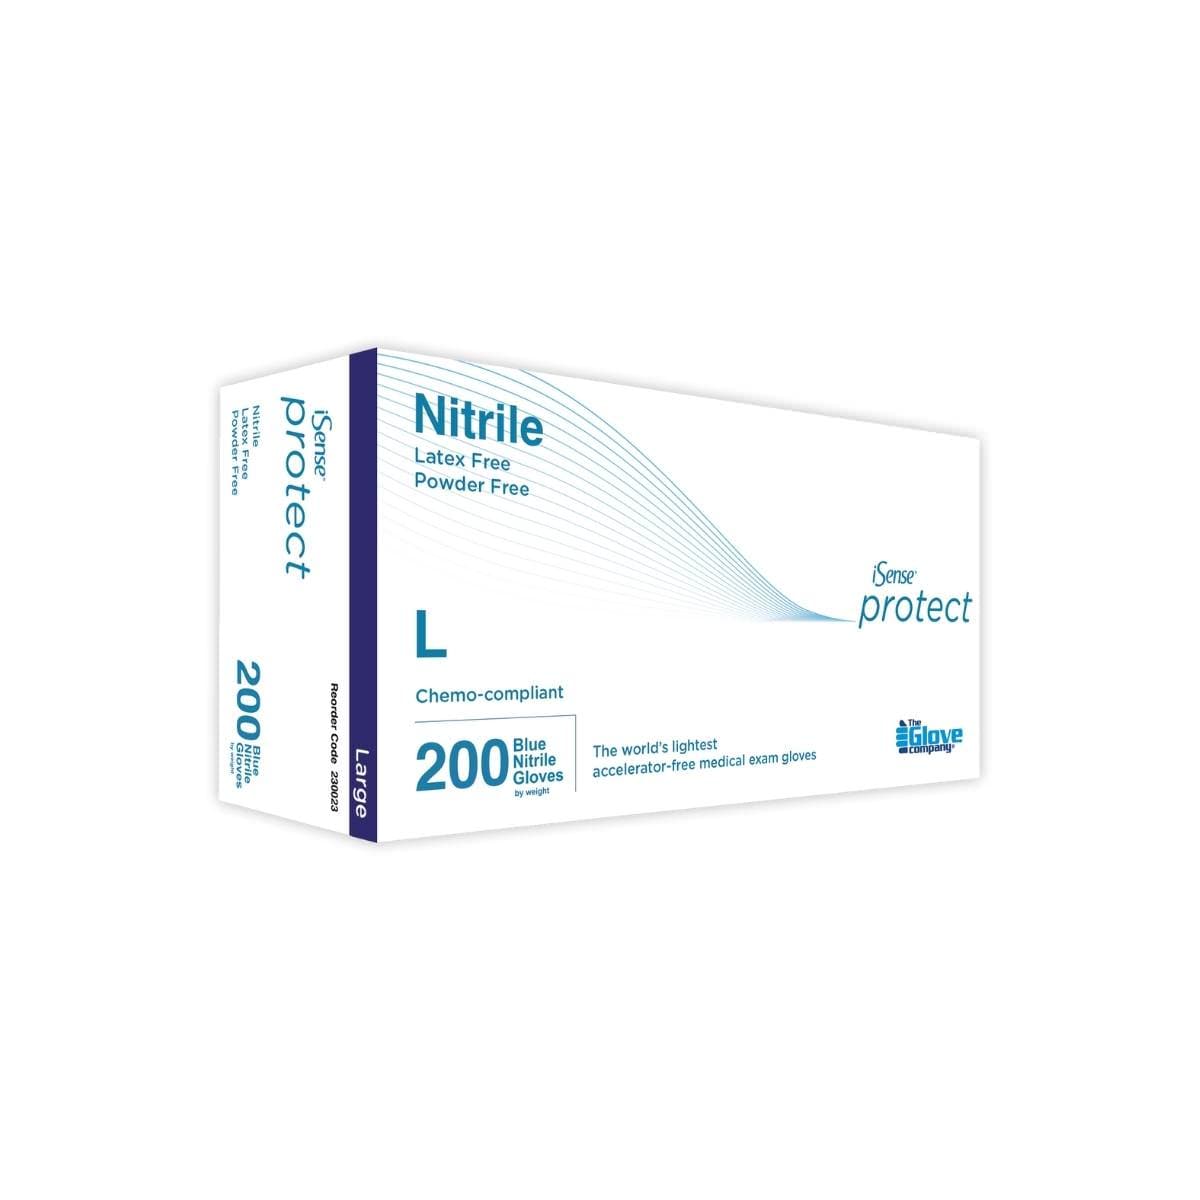 TGC iSense® Protect Nitrile Disposable Gloves 23002 (BOX OF 200)